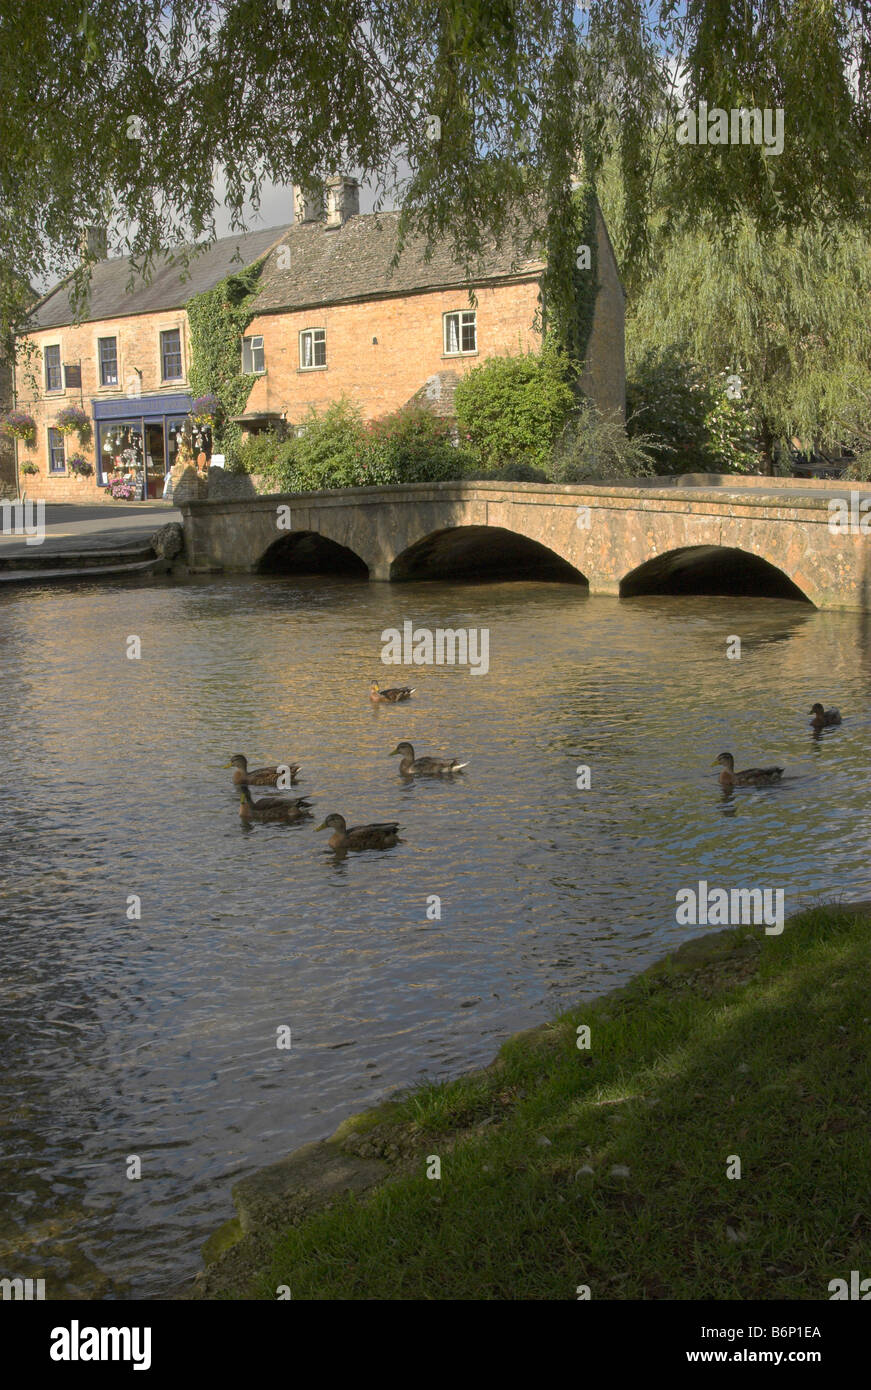 The River Windrush flowing through the picturesque Cotswold village of Bourton-on-the-Water, Gloucestershire. Stock Photo